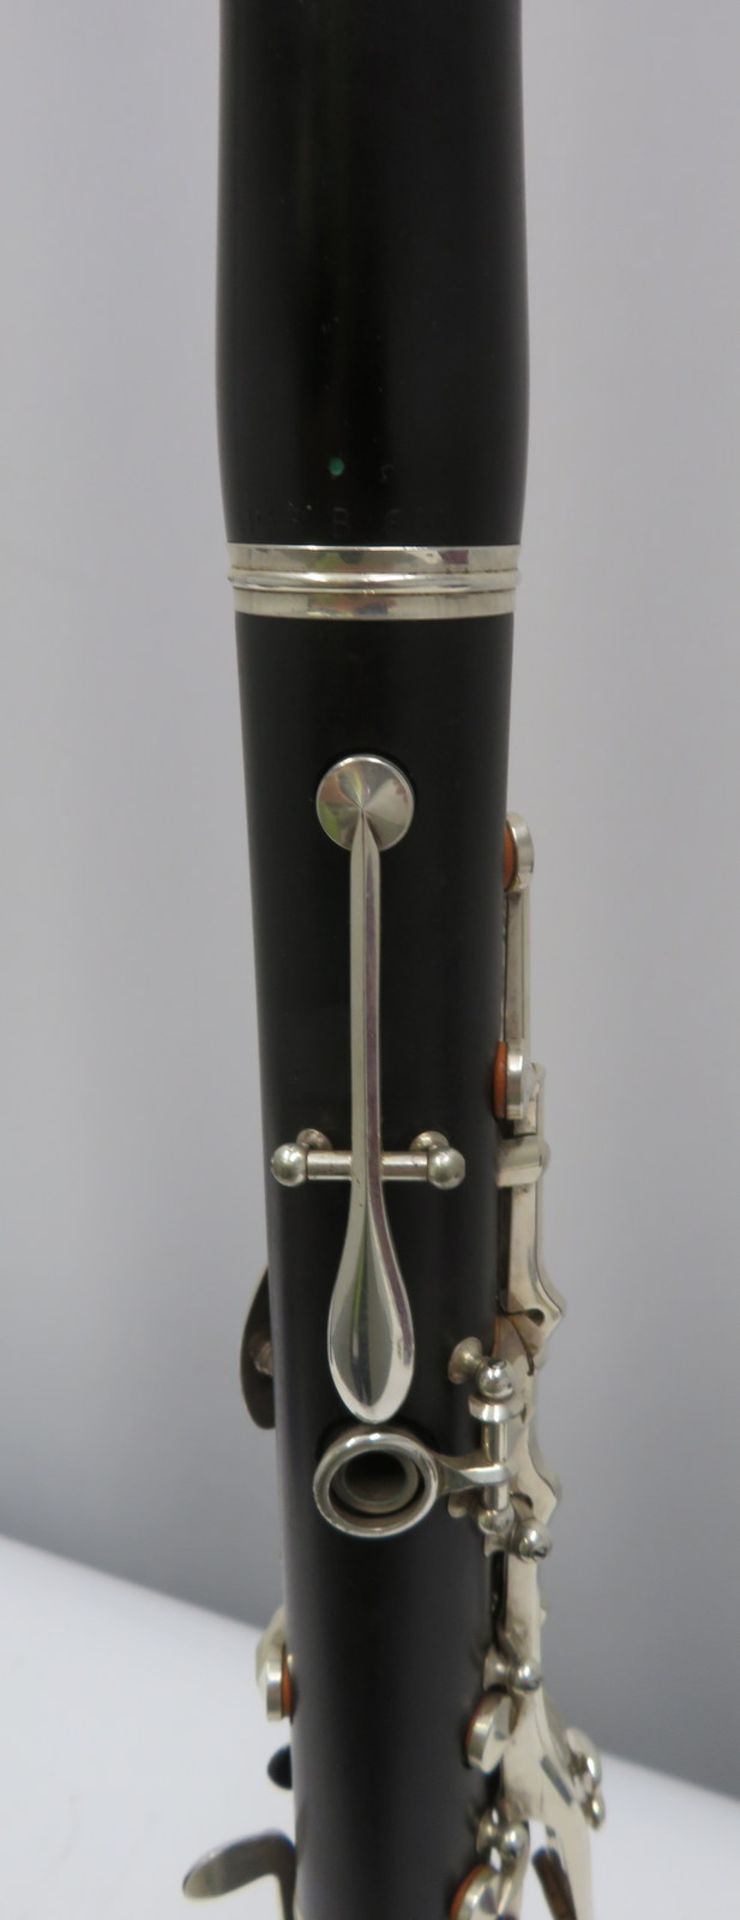 Buffet Crampon L Green clarinet with case. Serial number: 477678. - Image 10 of 19